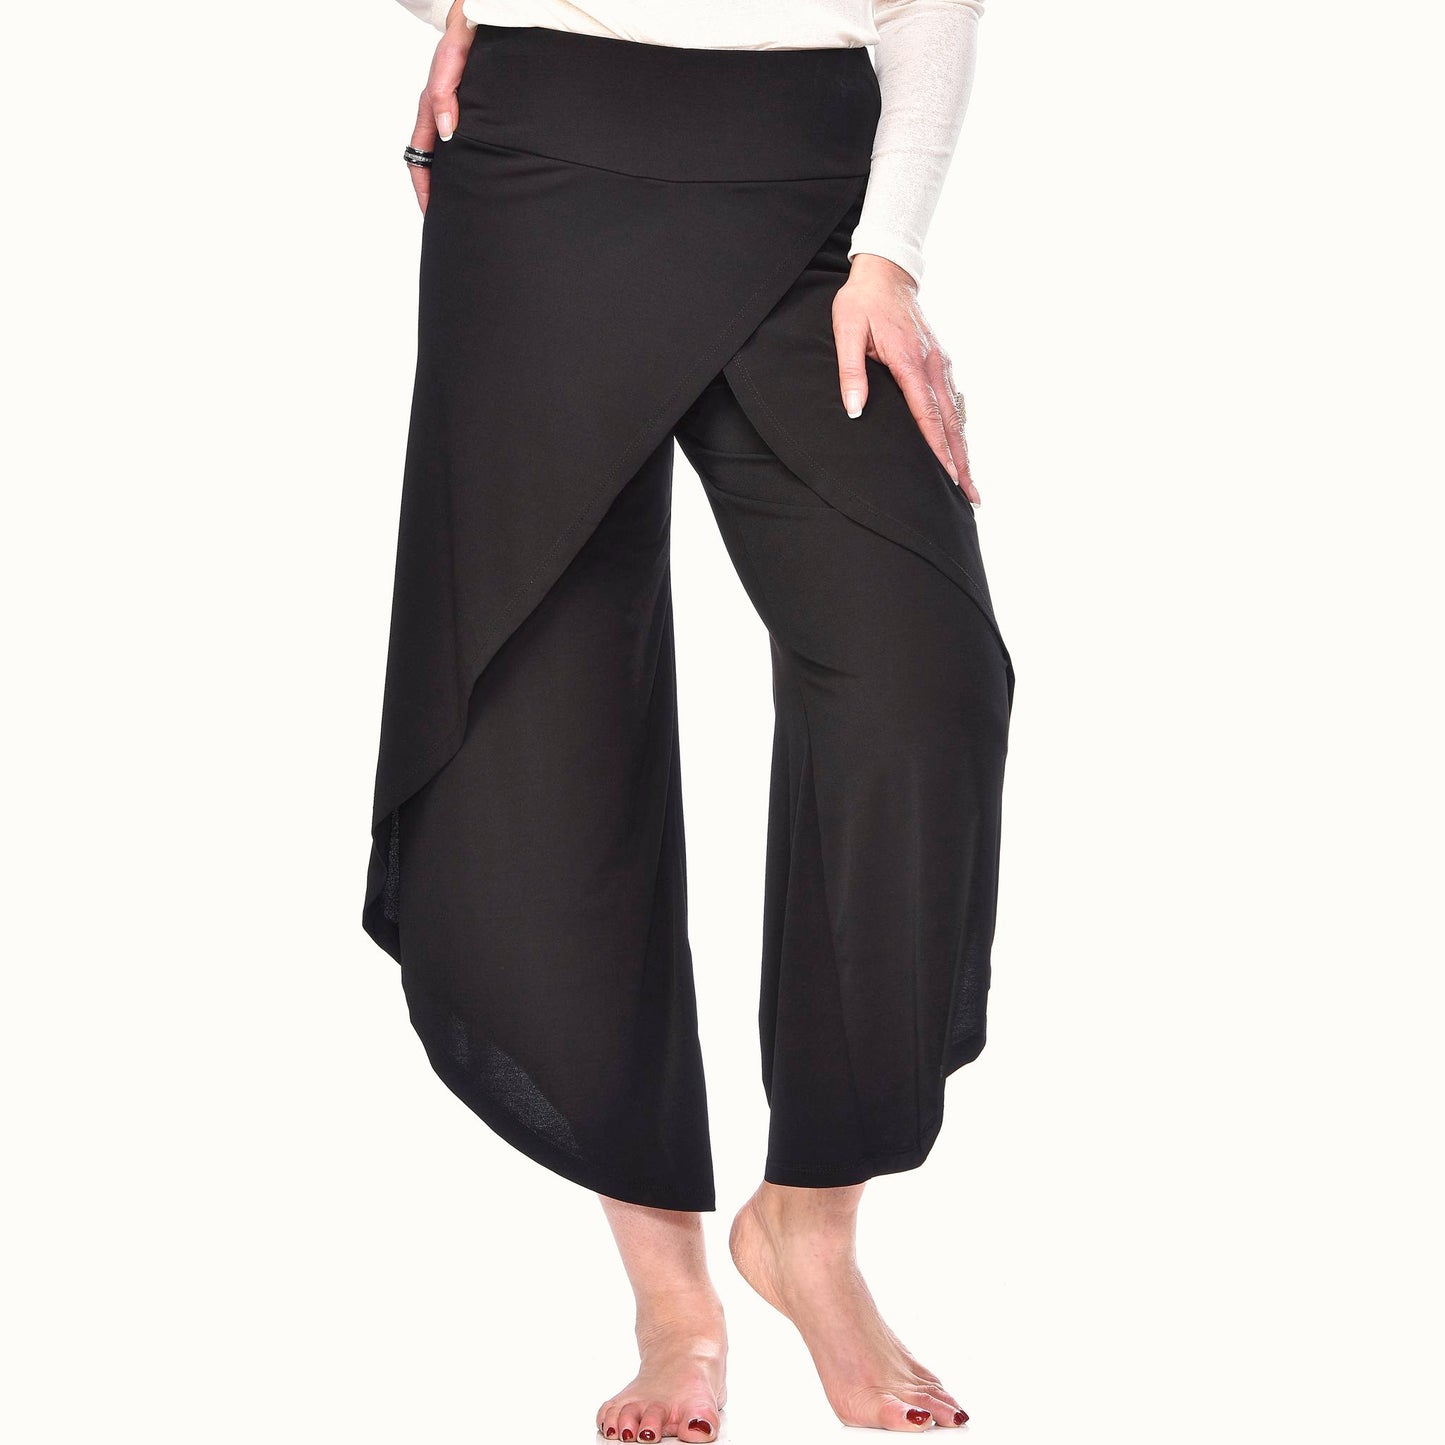 The Wrap Pant